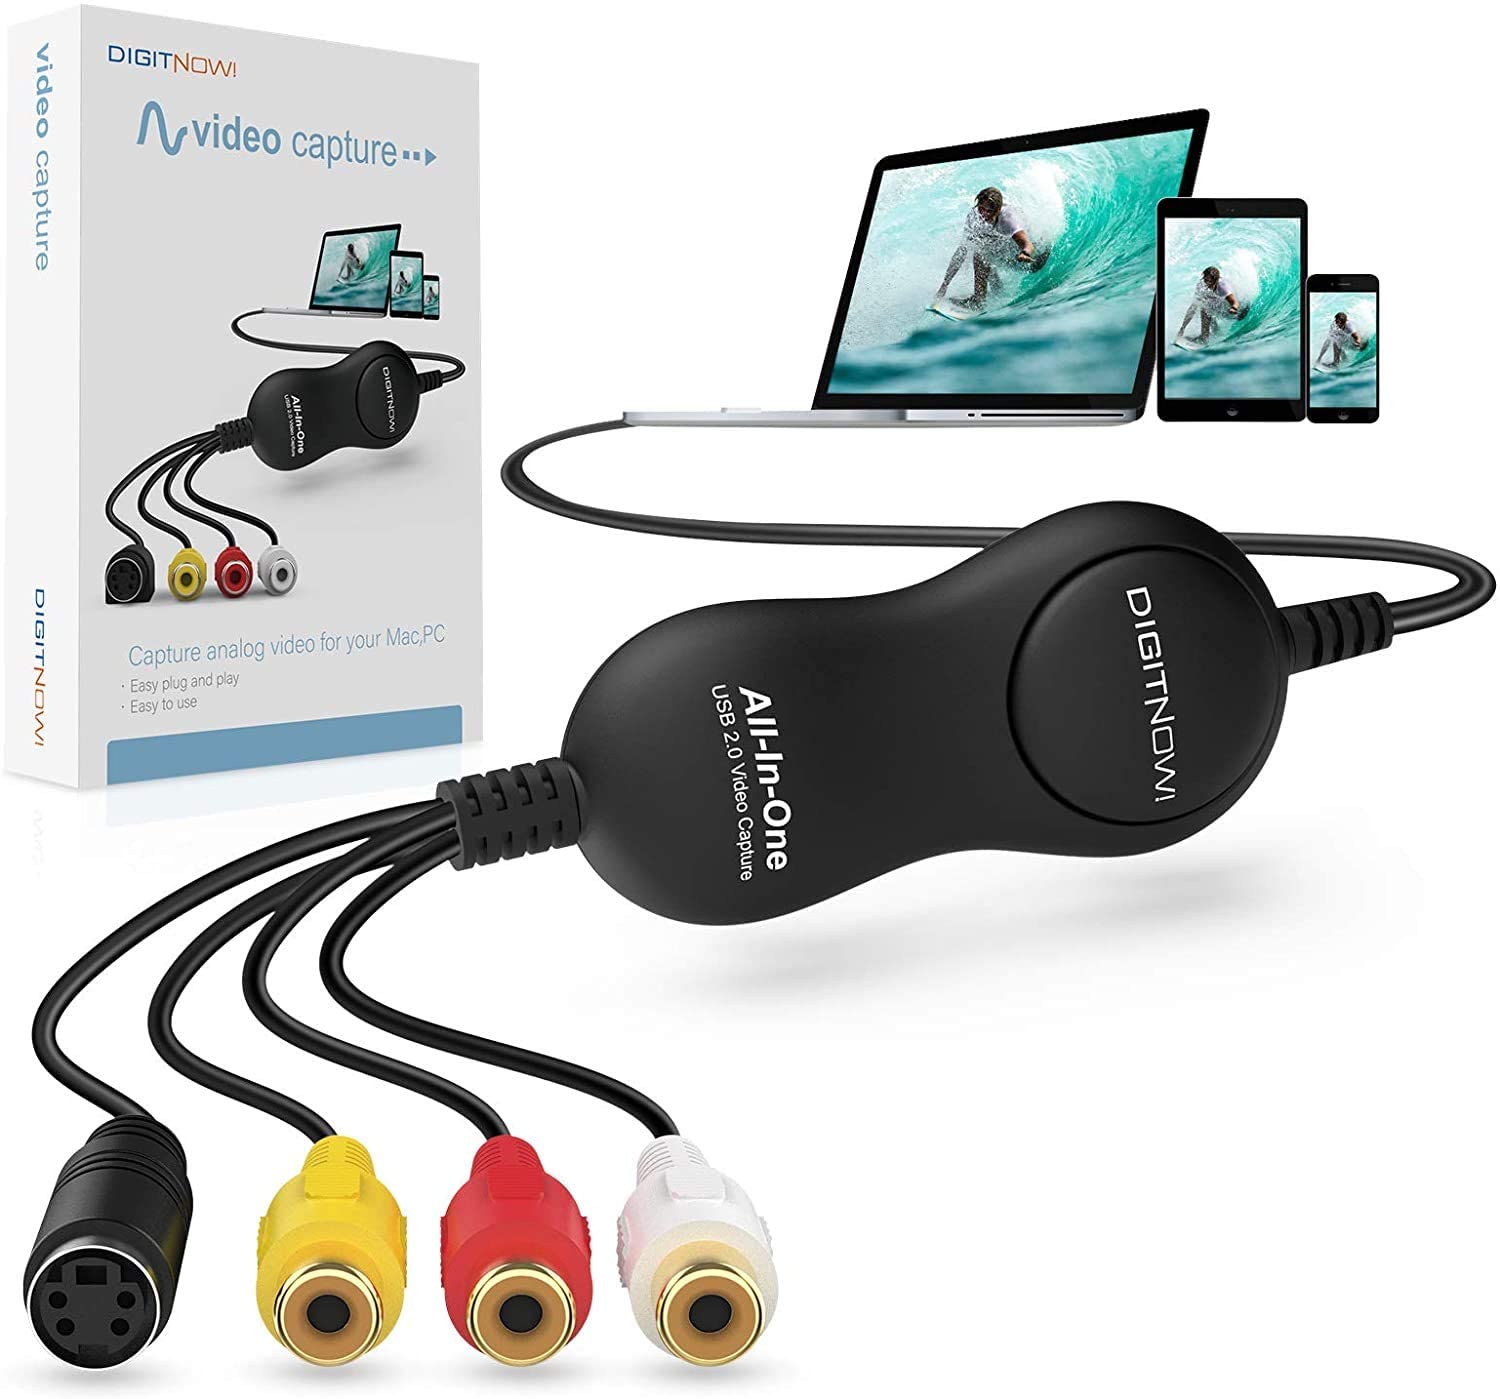 DIGITNOW Video Capture Converter, Capture Analog Video to Digital for Your  Mac or Windows 10 PC, iPad and iPhone, VHS to DVD